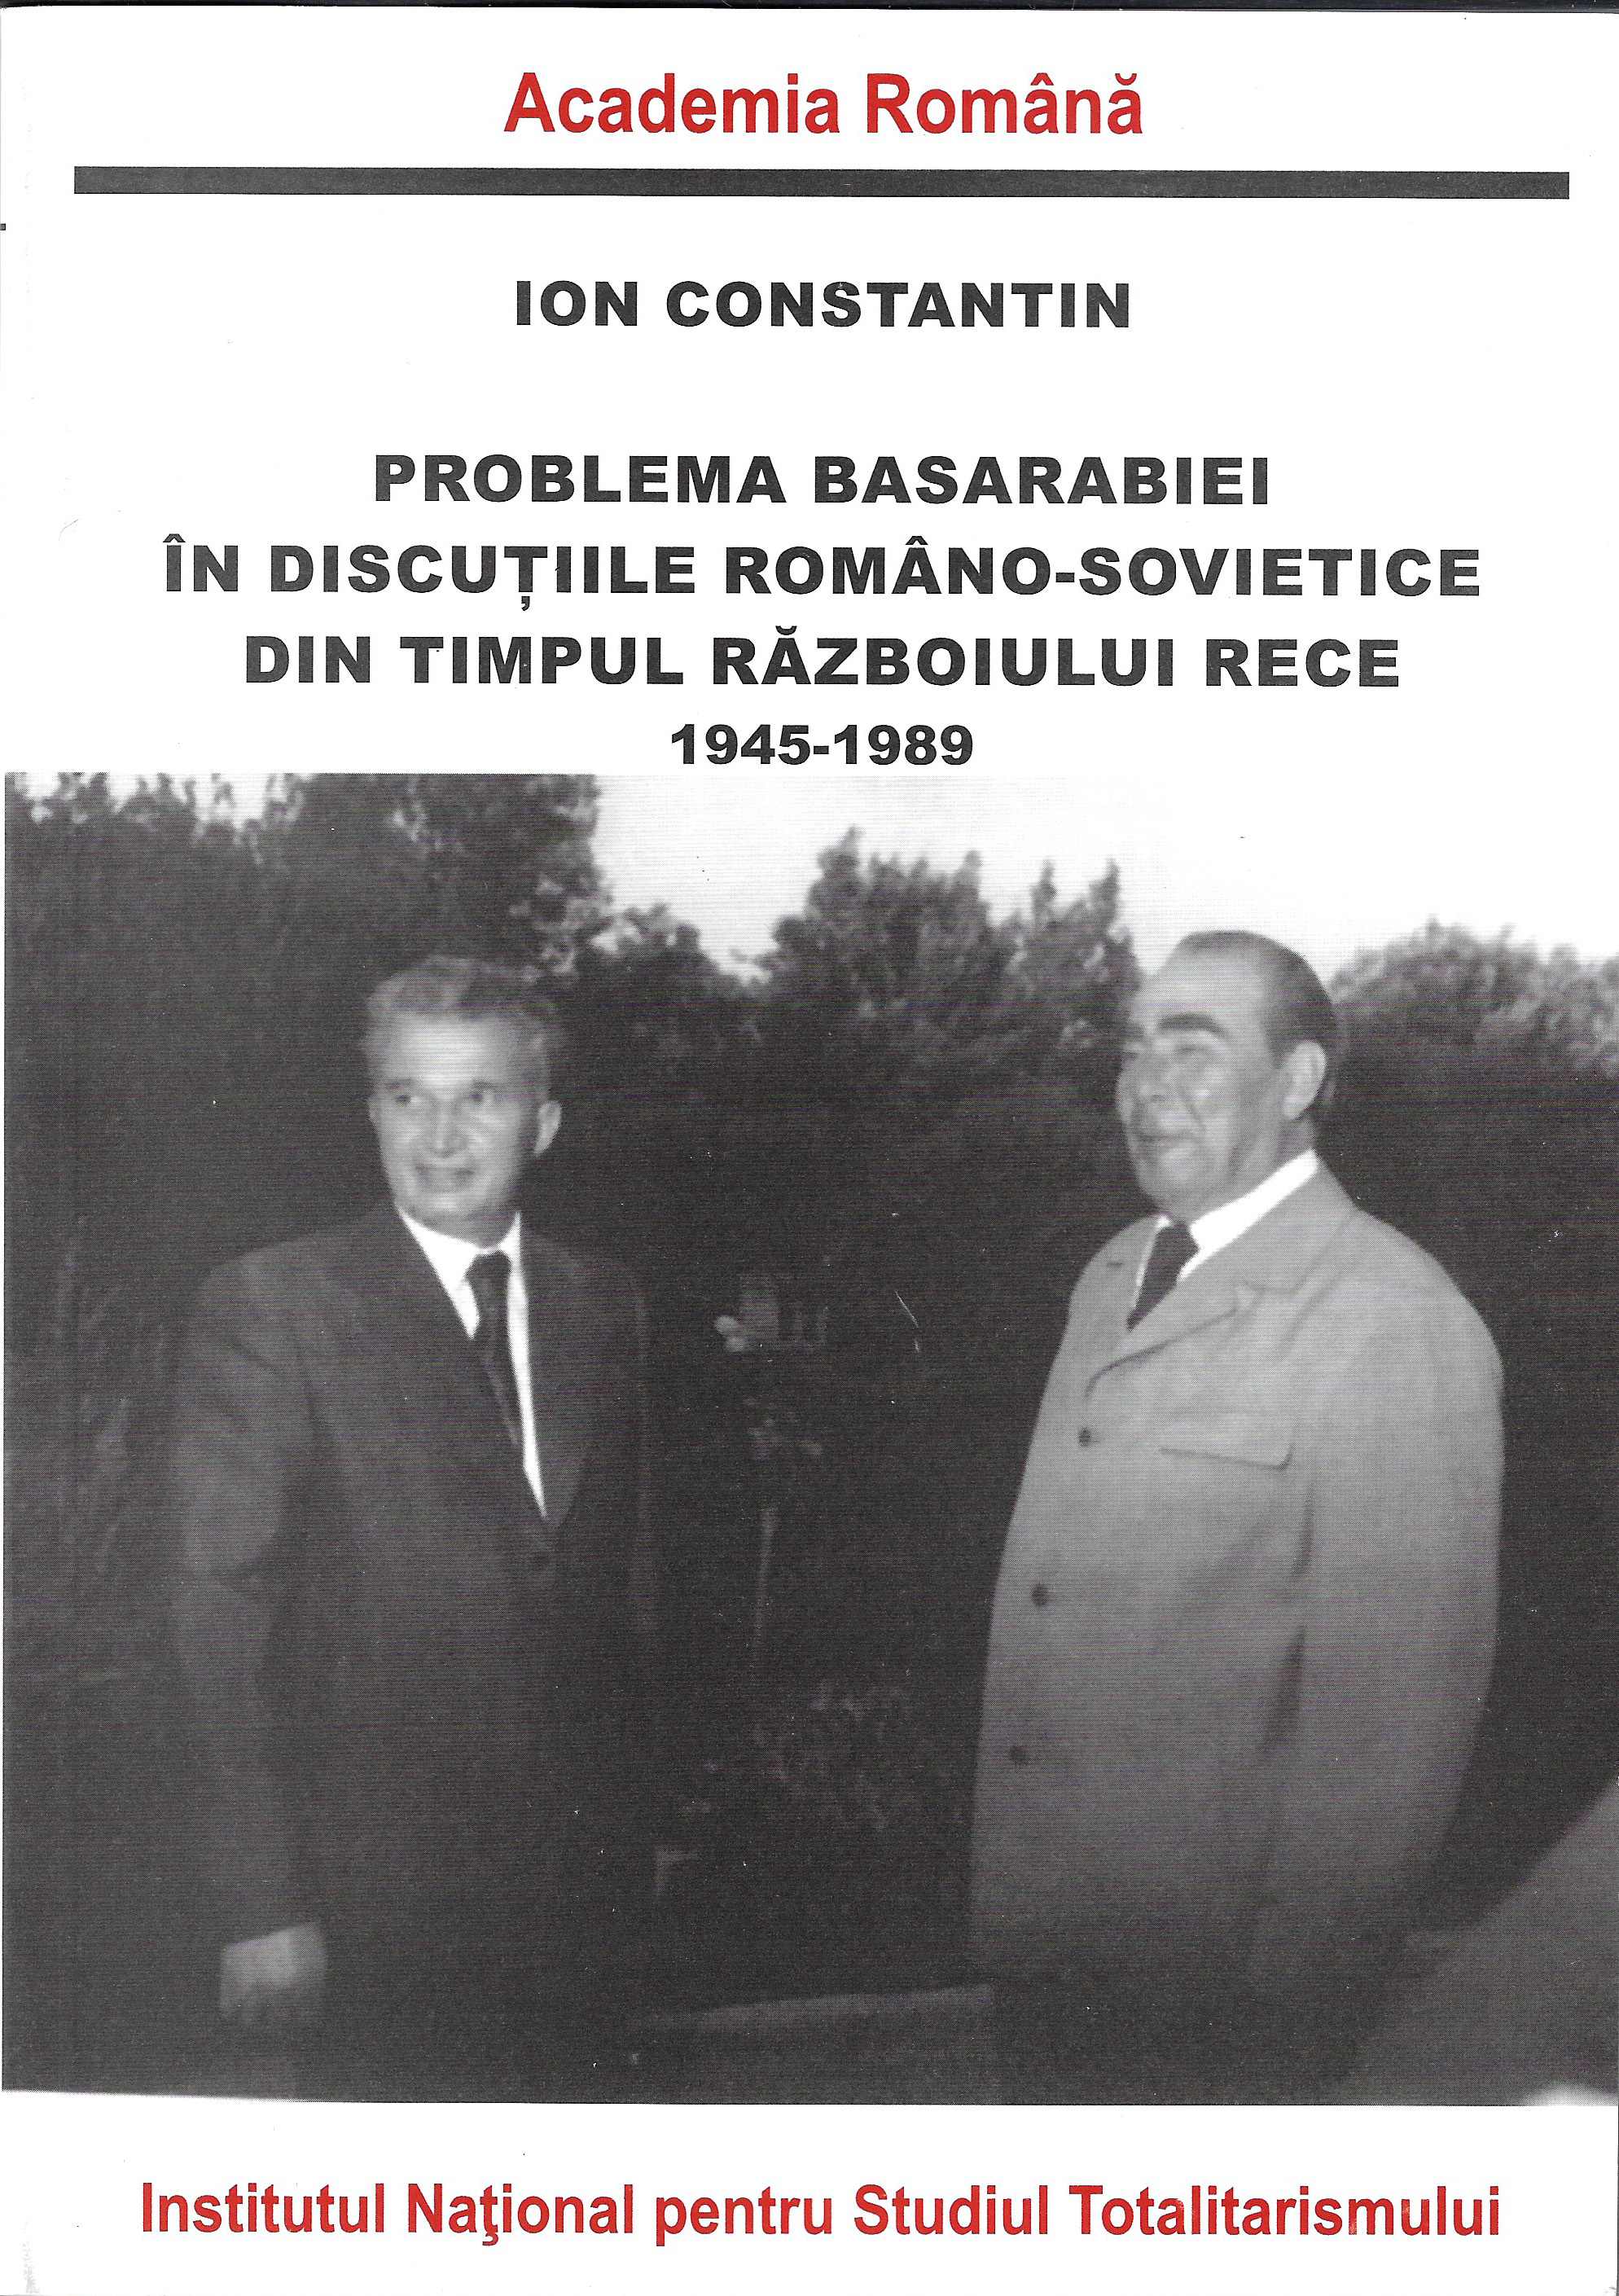 The Bessarabia Question in Romanian-Soviet Talks During the Cold War, 1945-1989